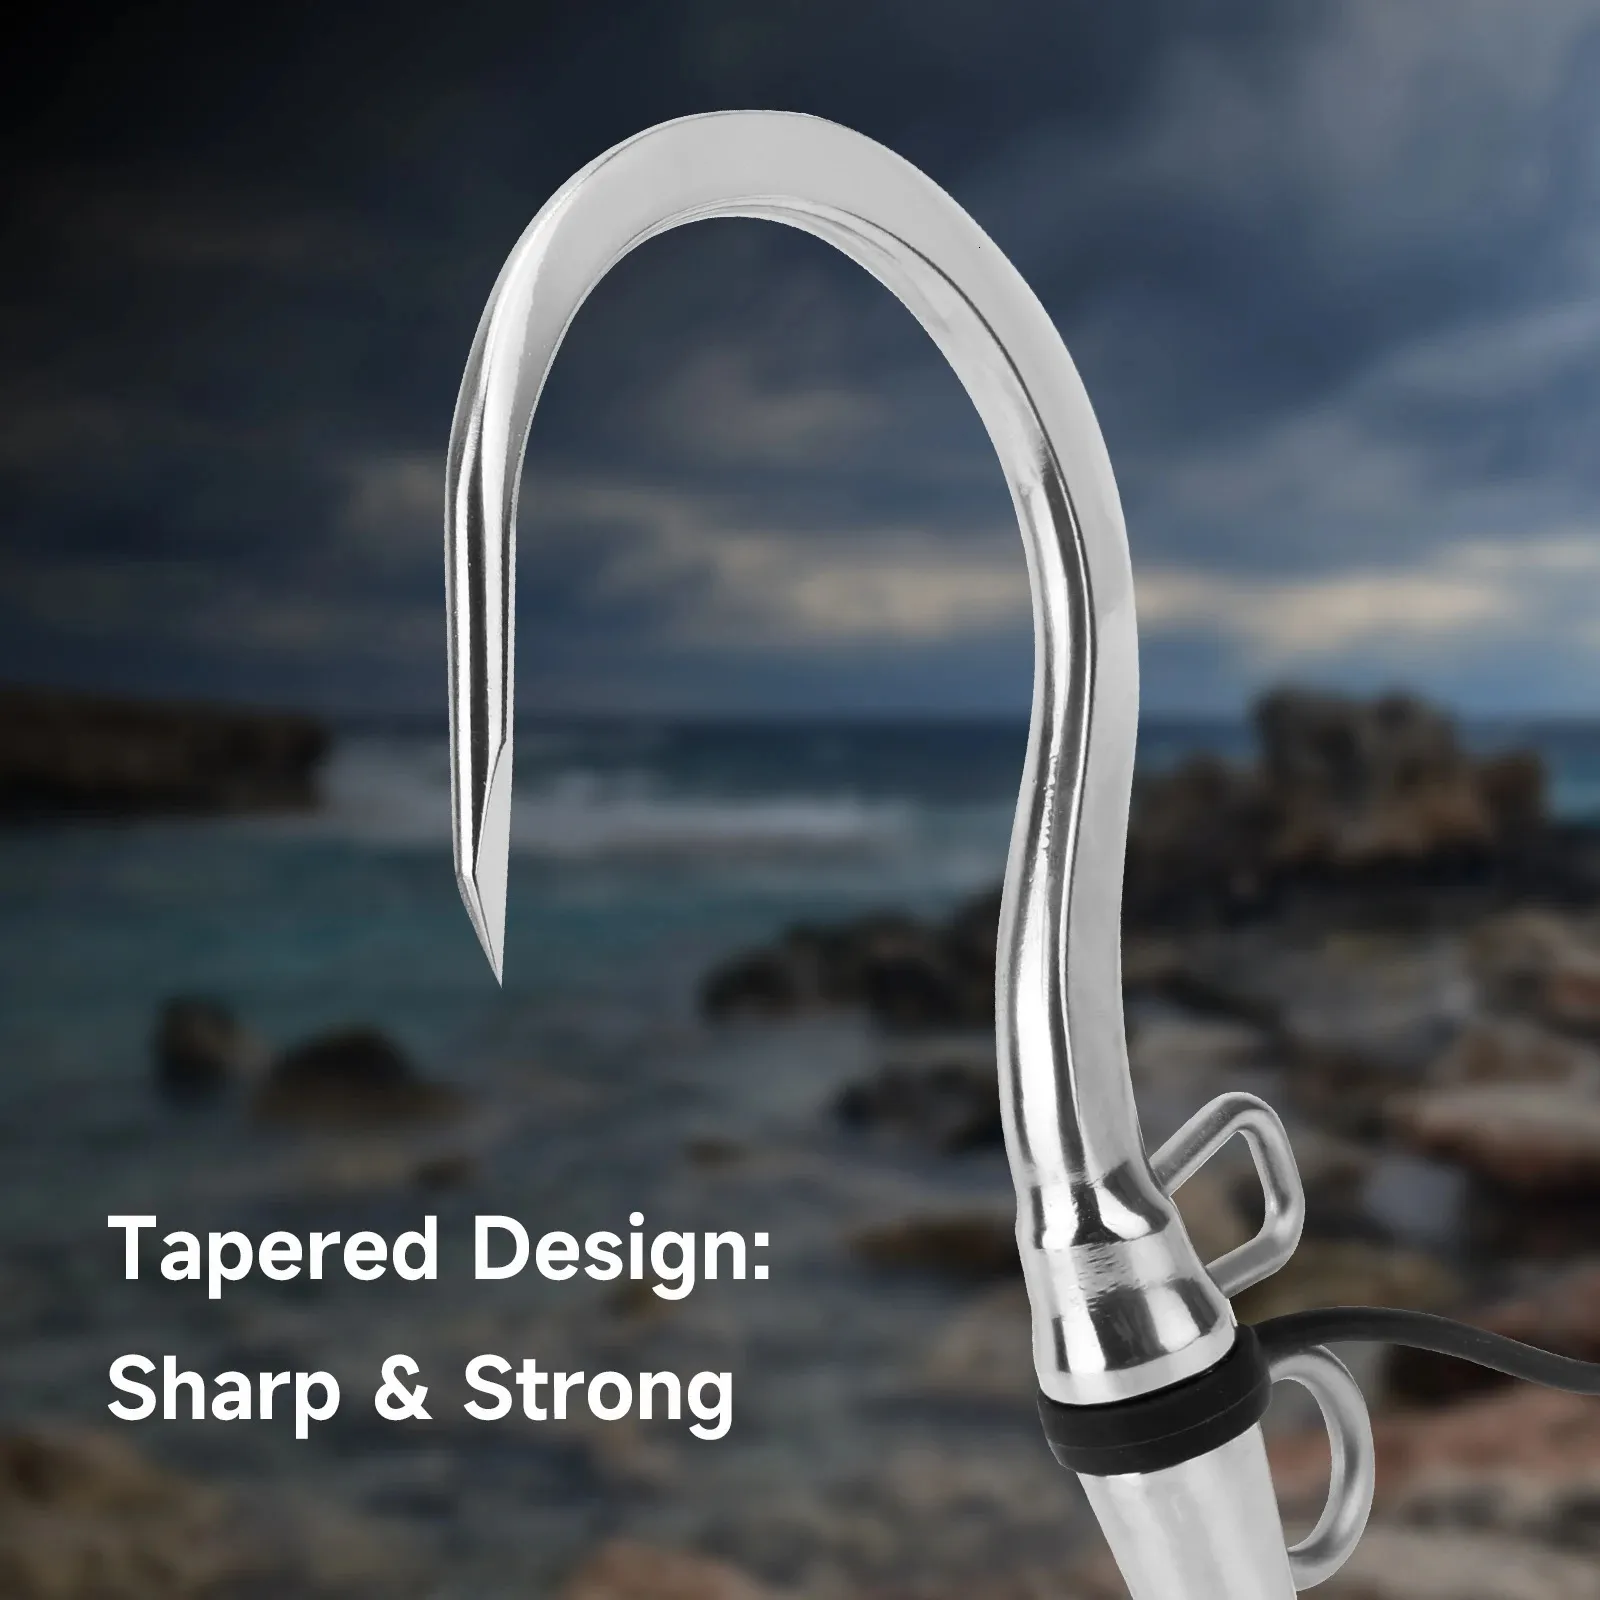 SANLIKE Double Hole Fishing Spear Hook 1/2 UNC Stainless Steel Fish Gaff  For Saltwater & Freshwater Fishing Efficient & Durable Tool With 231204  Model Number From Jiu09, $24.25